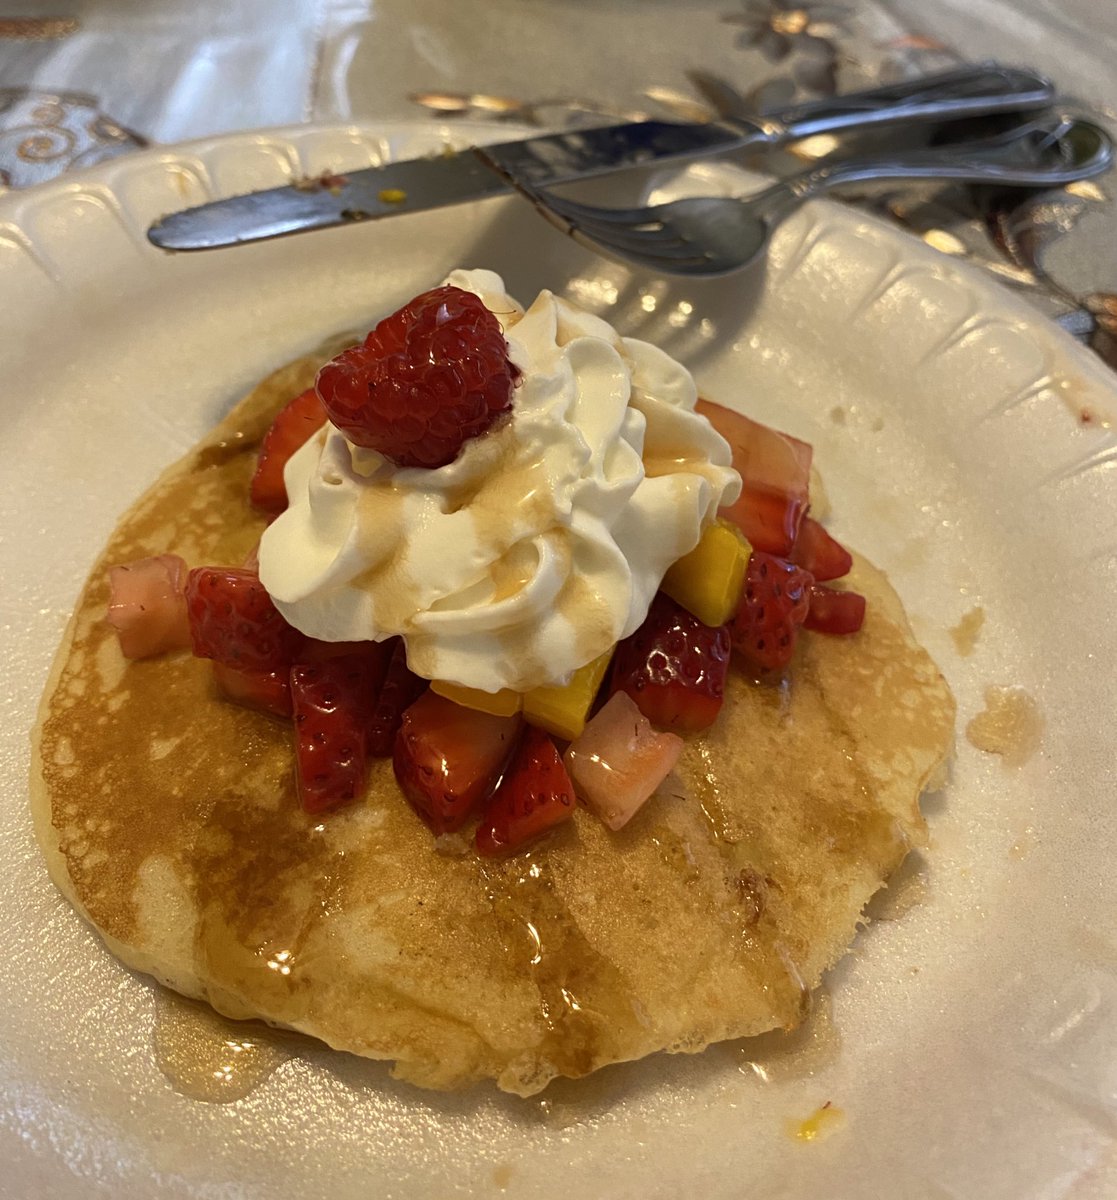 Day 20: Mom made pancakes. She threw an extra one on my plate after I finished, and since me and my sister were the last ones eating, I figured I’d get a little cutesy. As you can (kinda) see, there’s mango under the whipped cream and that was the Best Part